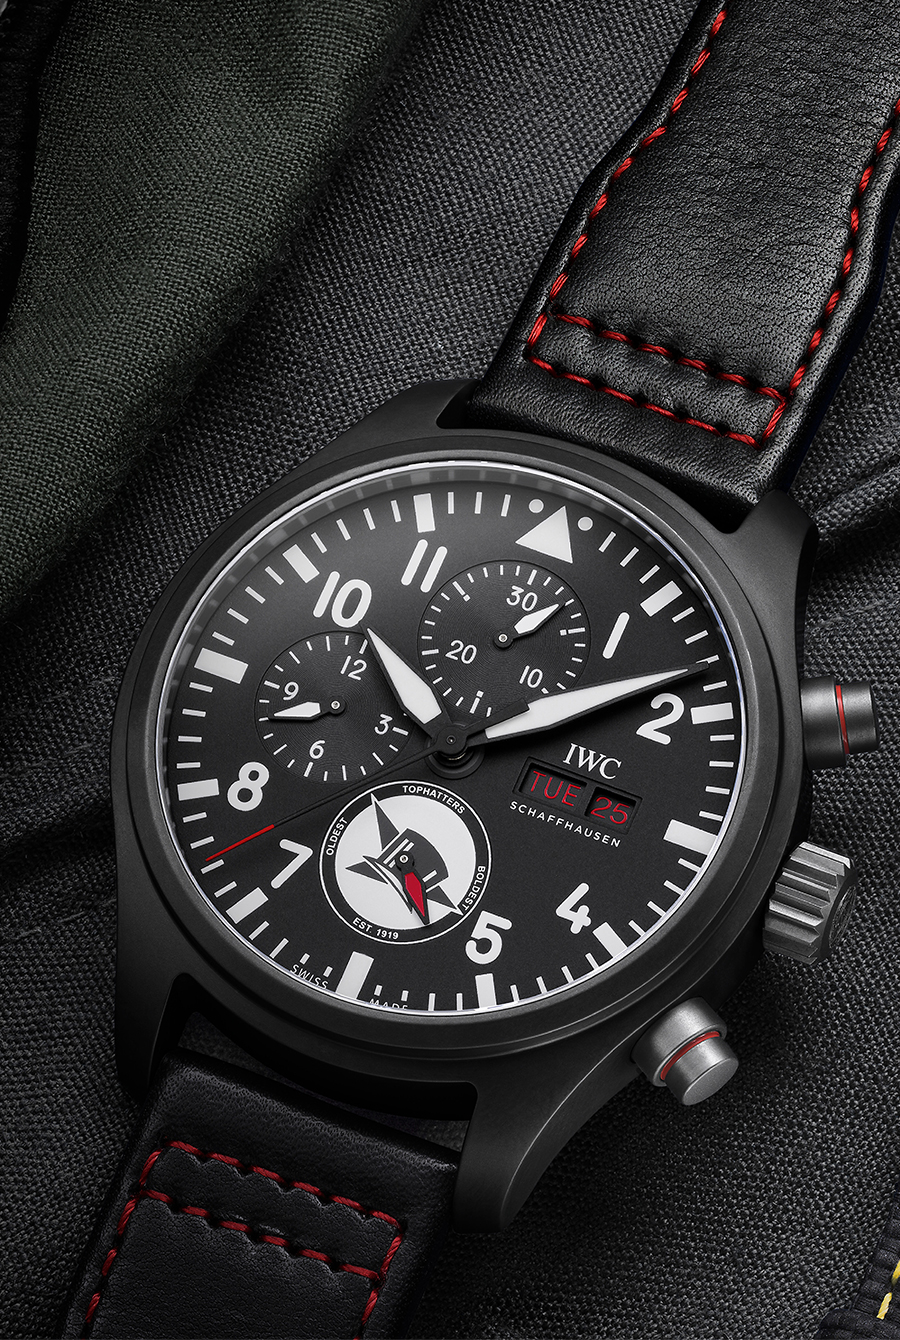 IW389108 PILOT’S WATCH CHRONOGRAPH EDITION “TOPHATTERS”